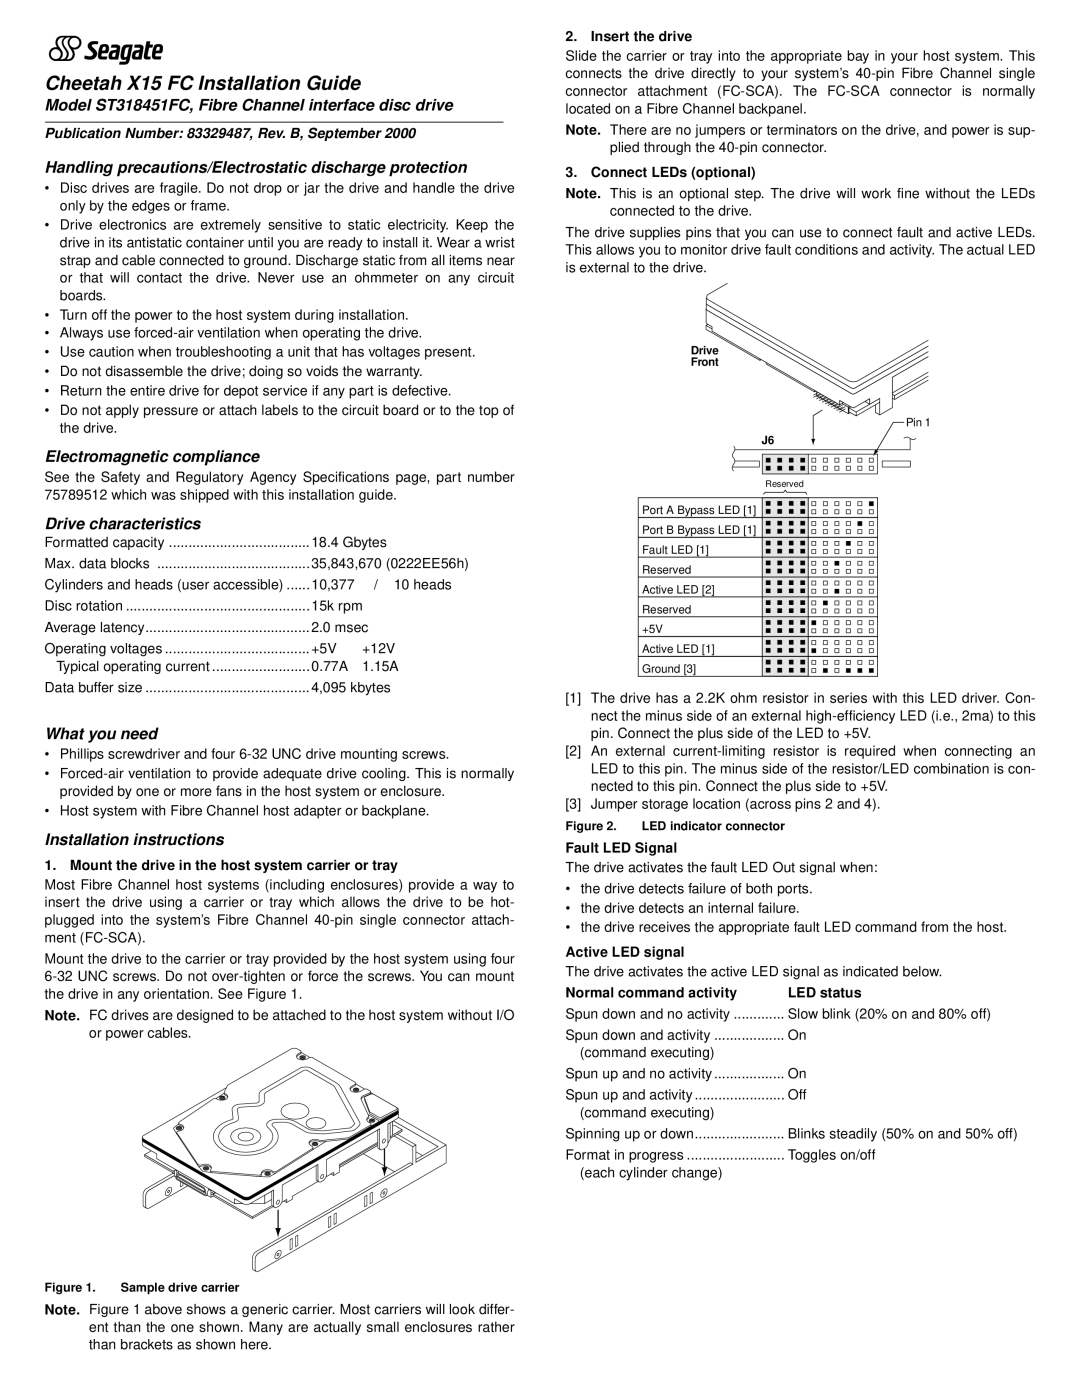 Seagate installation instructions Model ST318451FC, Fibre Channel interface disc drive, Electromagnetic compliance 